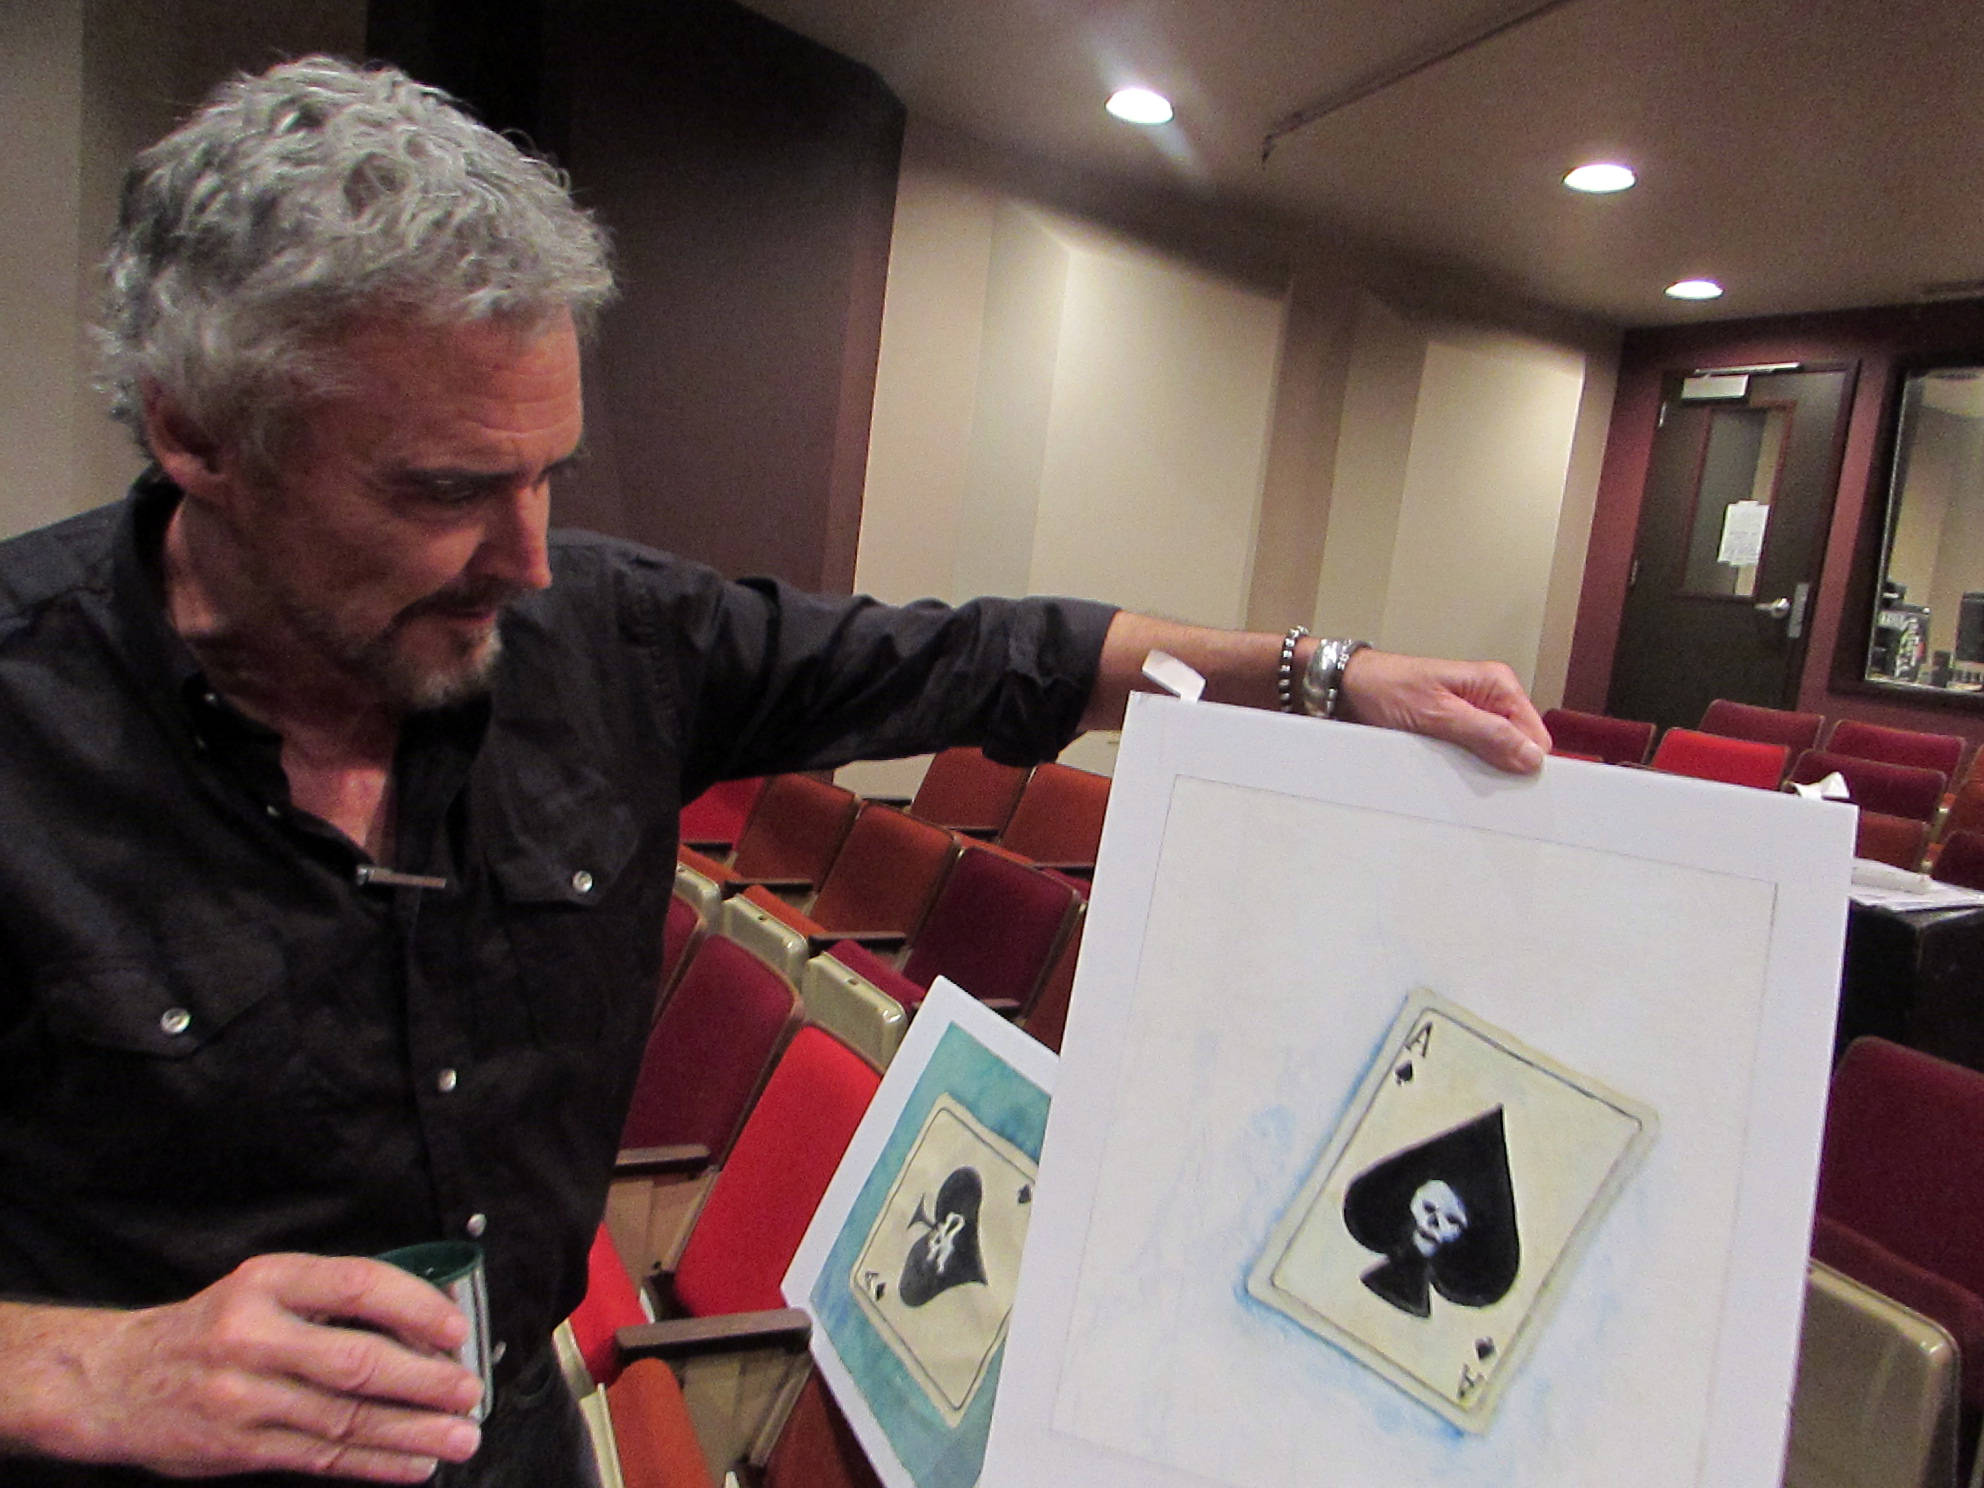 Dave Hunsaker, librettist and stage director for “The Princess Sophia” opera, shows off art by Dan Fruits, which will be projected at a much larger scale during the opera. Ben Hohenstatt | Capital City Weekly)